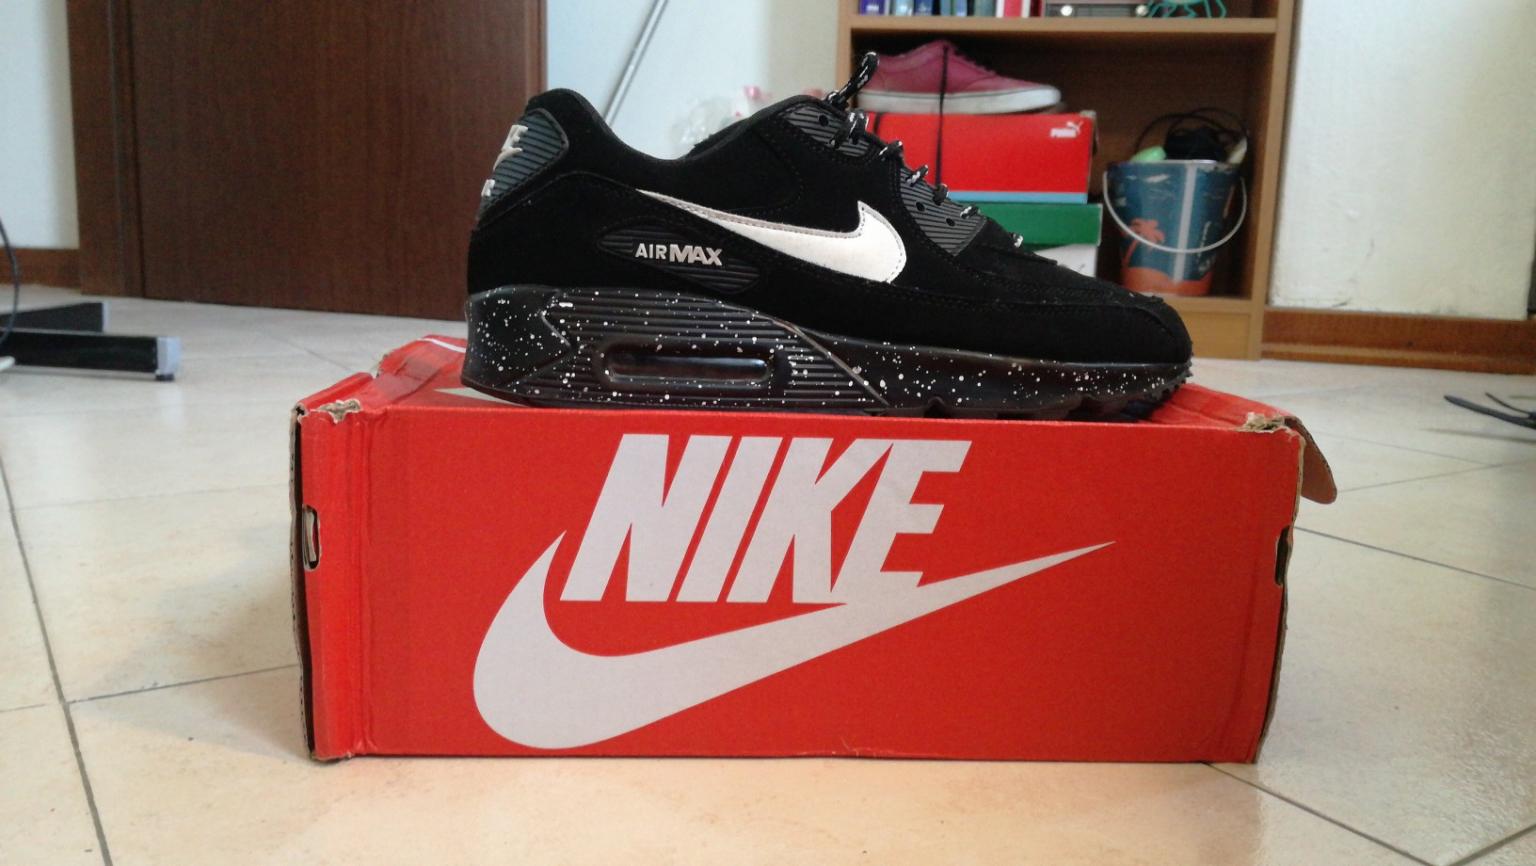 Nike Air Max 90 Essential US 9.5 EU 43 in 56127 Pisa for €30.00 for sale |  Shpock